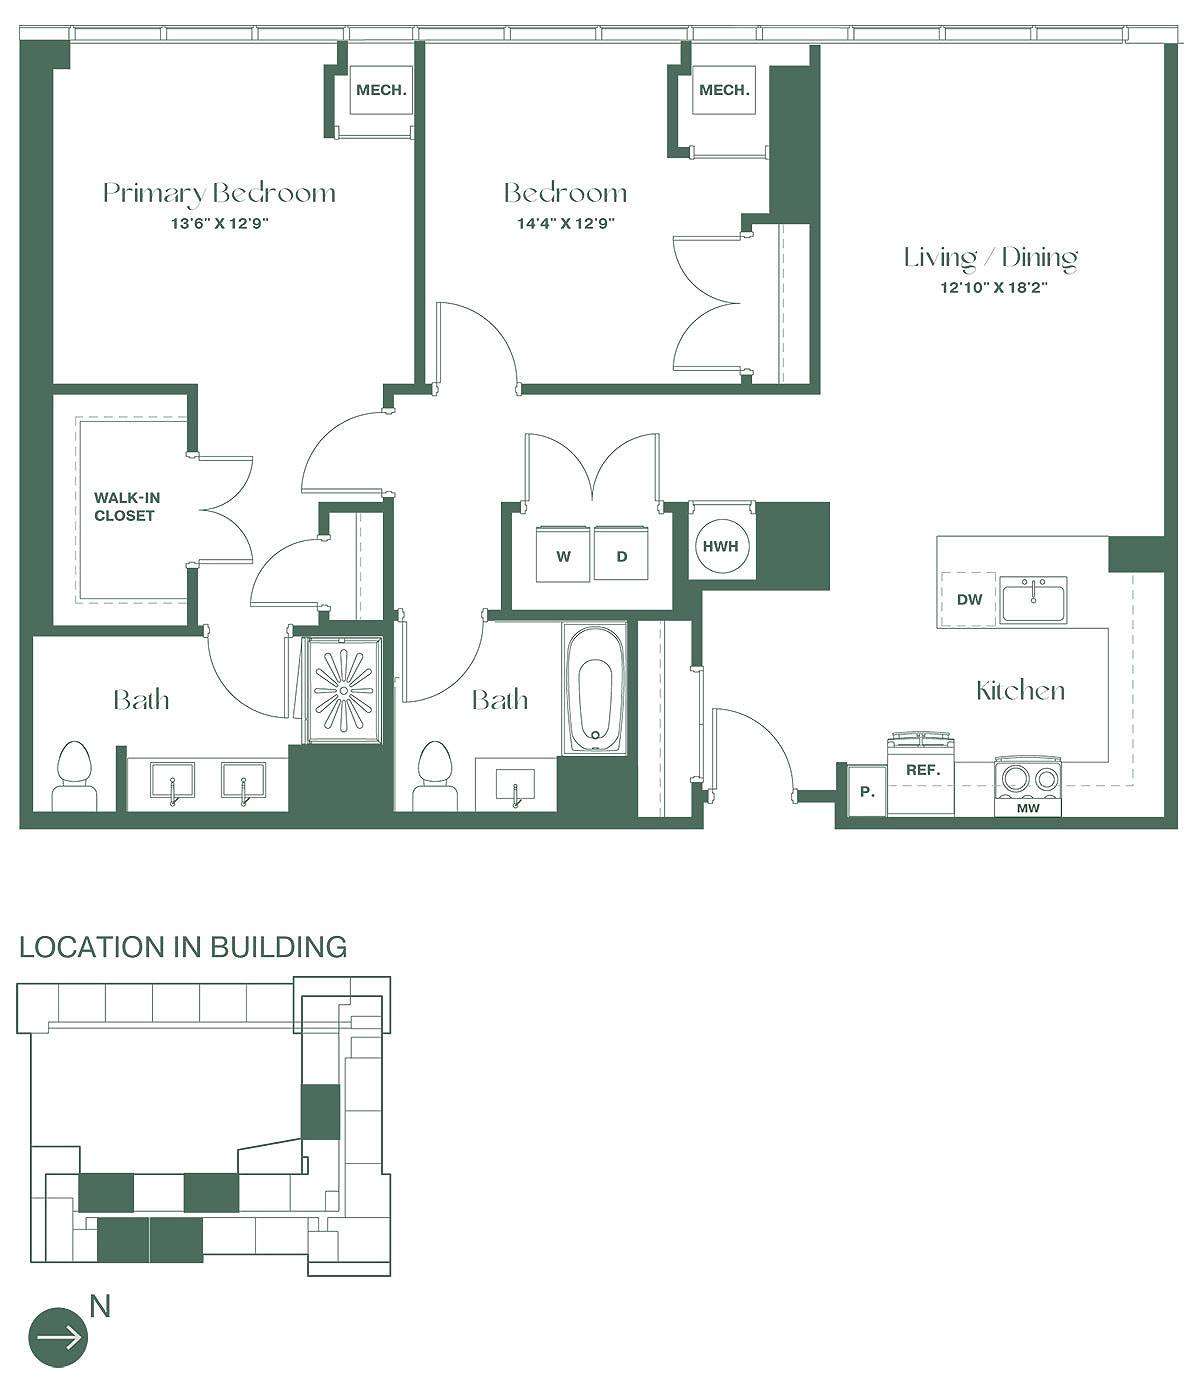 Floorplan for a two-bedroom, two-bath apartment at RVR at Xchange opens into a fully equipped kitchen w/ dishwasher and pantry. Continuing into the apartment there is a spacious living and dining room area, two bedrooms and 2 full bathrooms.